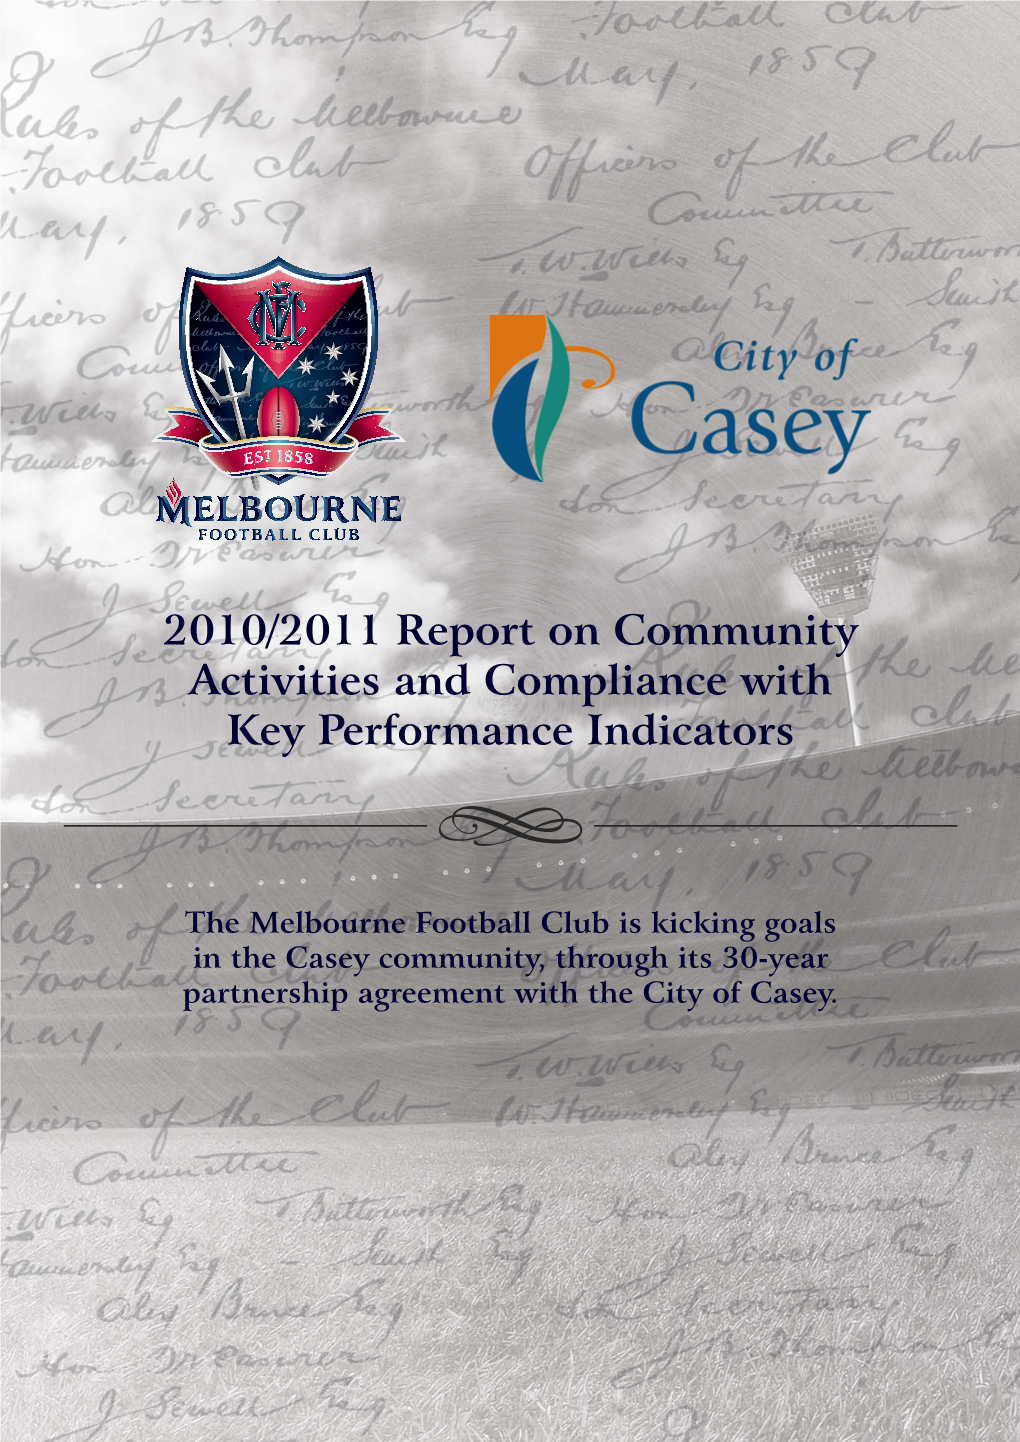 2010/2011 Report on Community Activities and Compliance with Key Performance Indicators